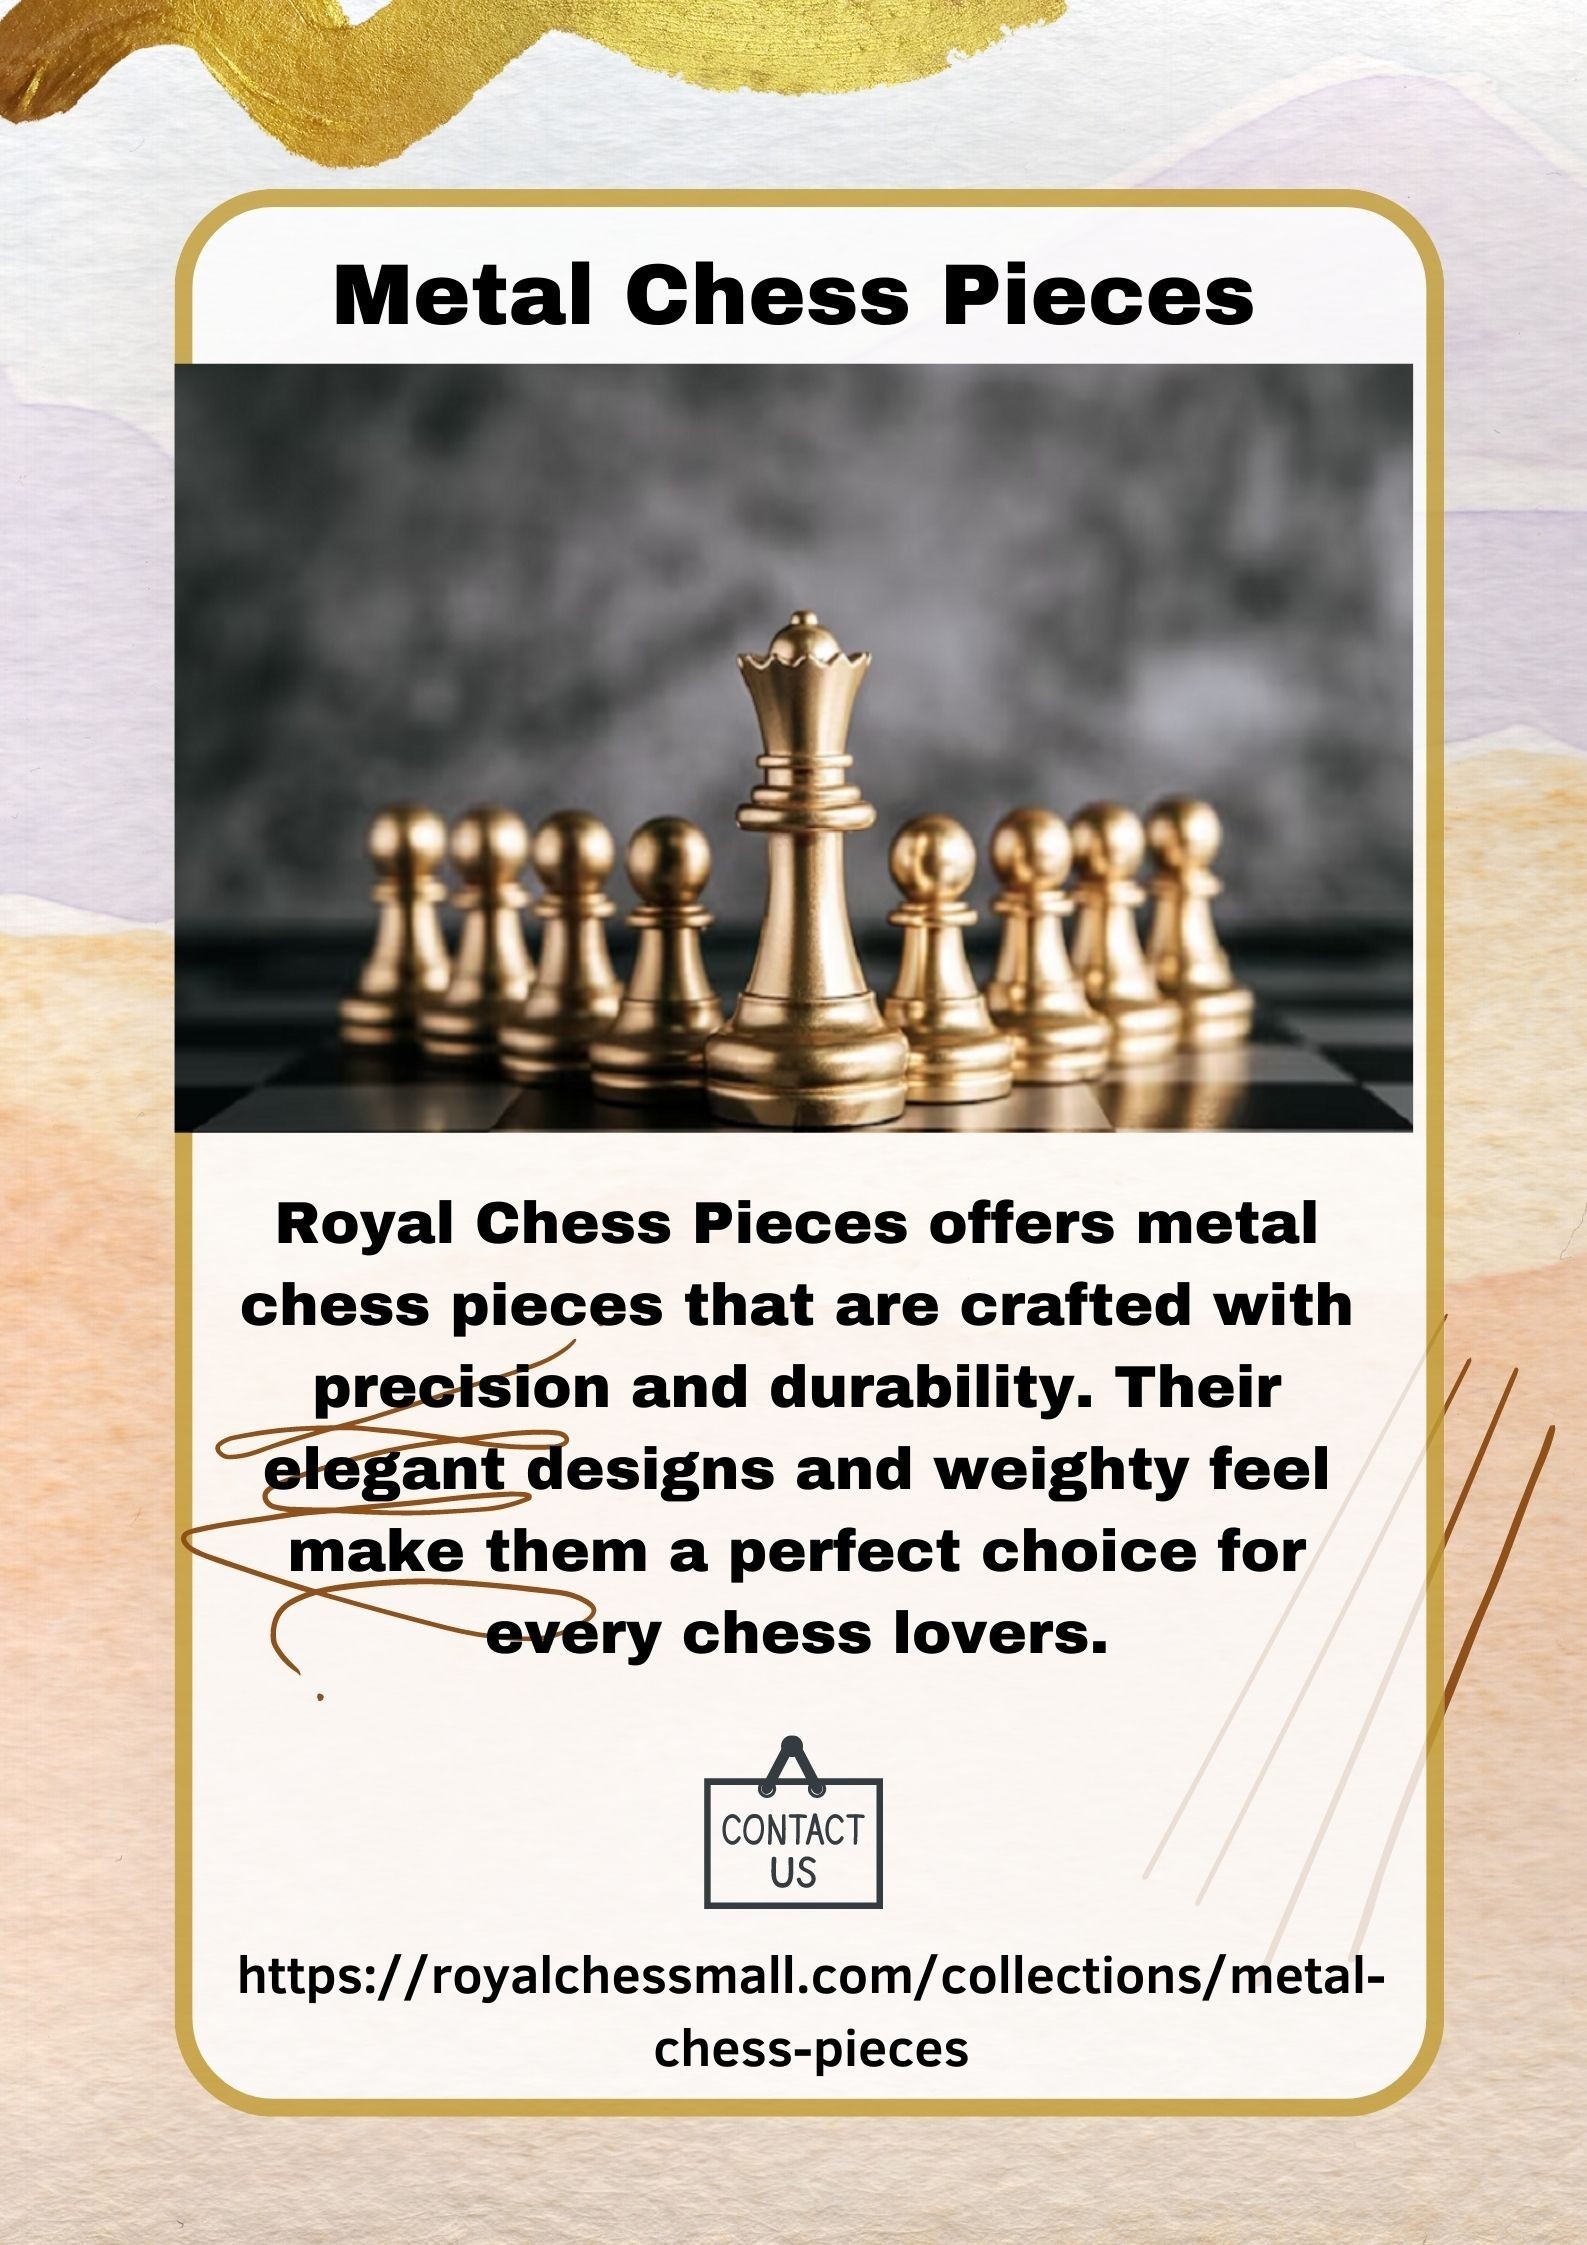 Unyielding Elegance: The Power and Beauty of Metal Chess Pieces